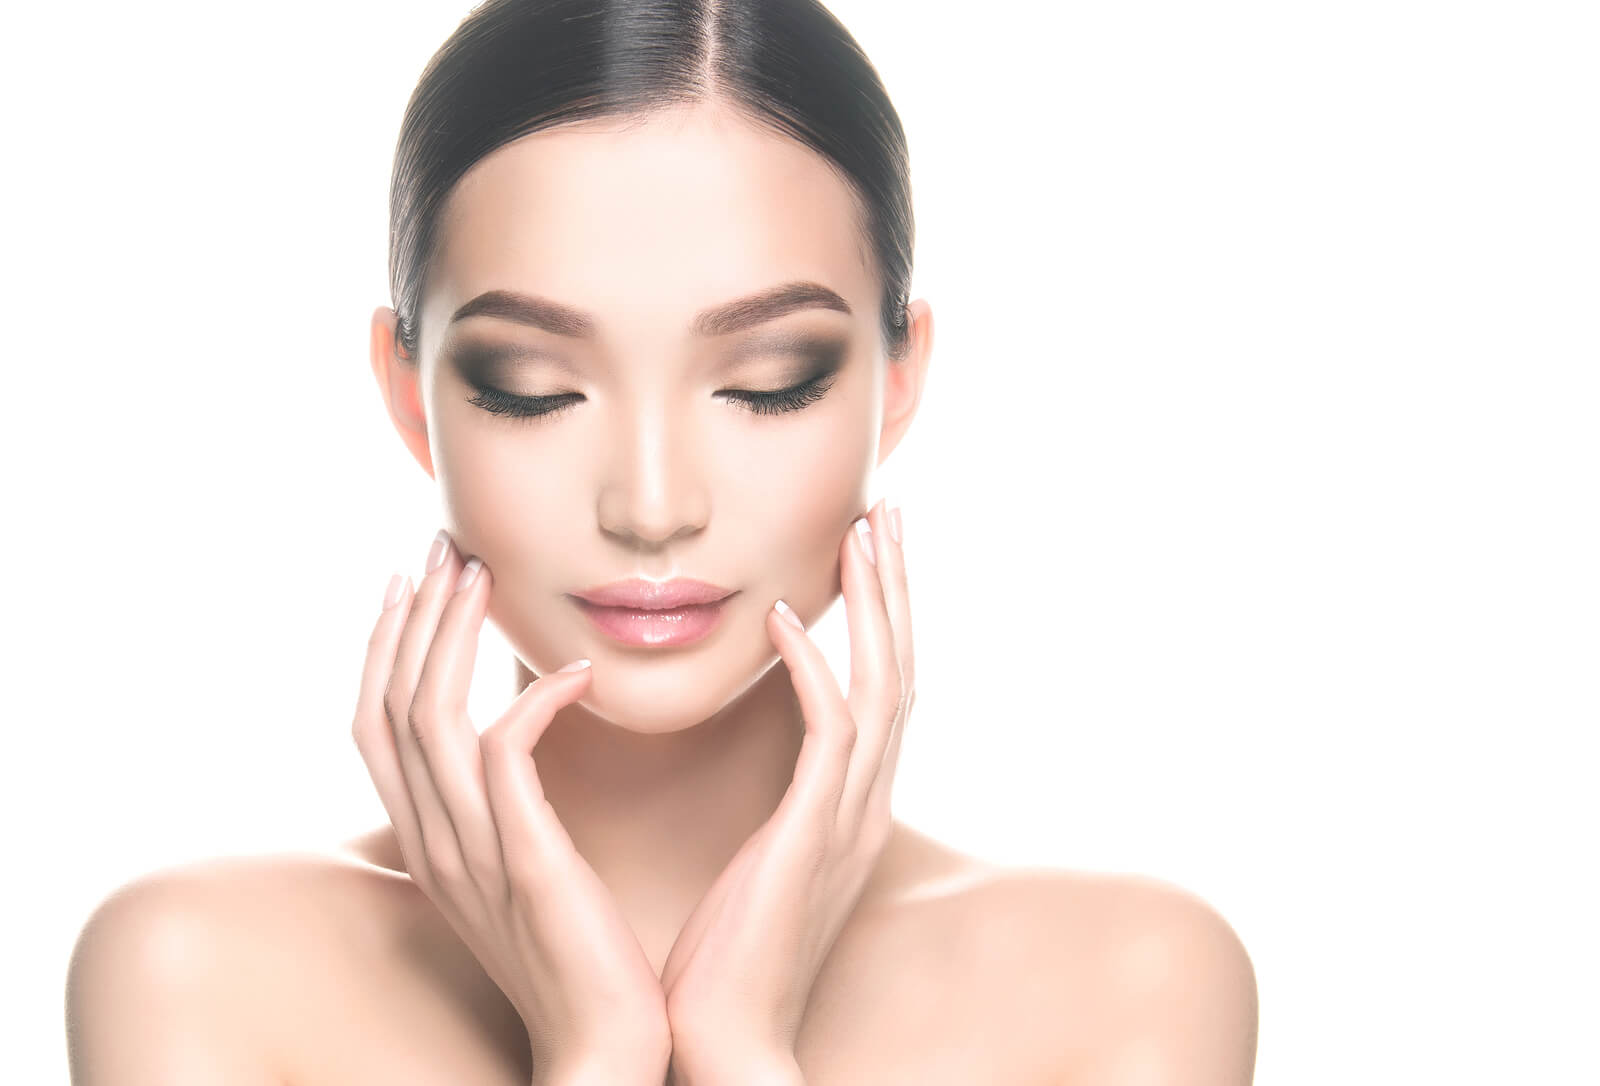 Facial Rejuvenation—Turning Back the Hands of Time Without Surgery